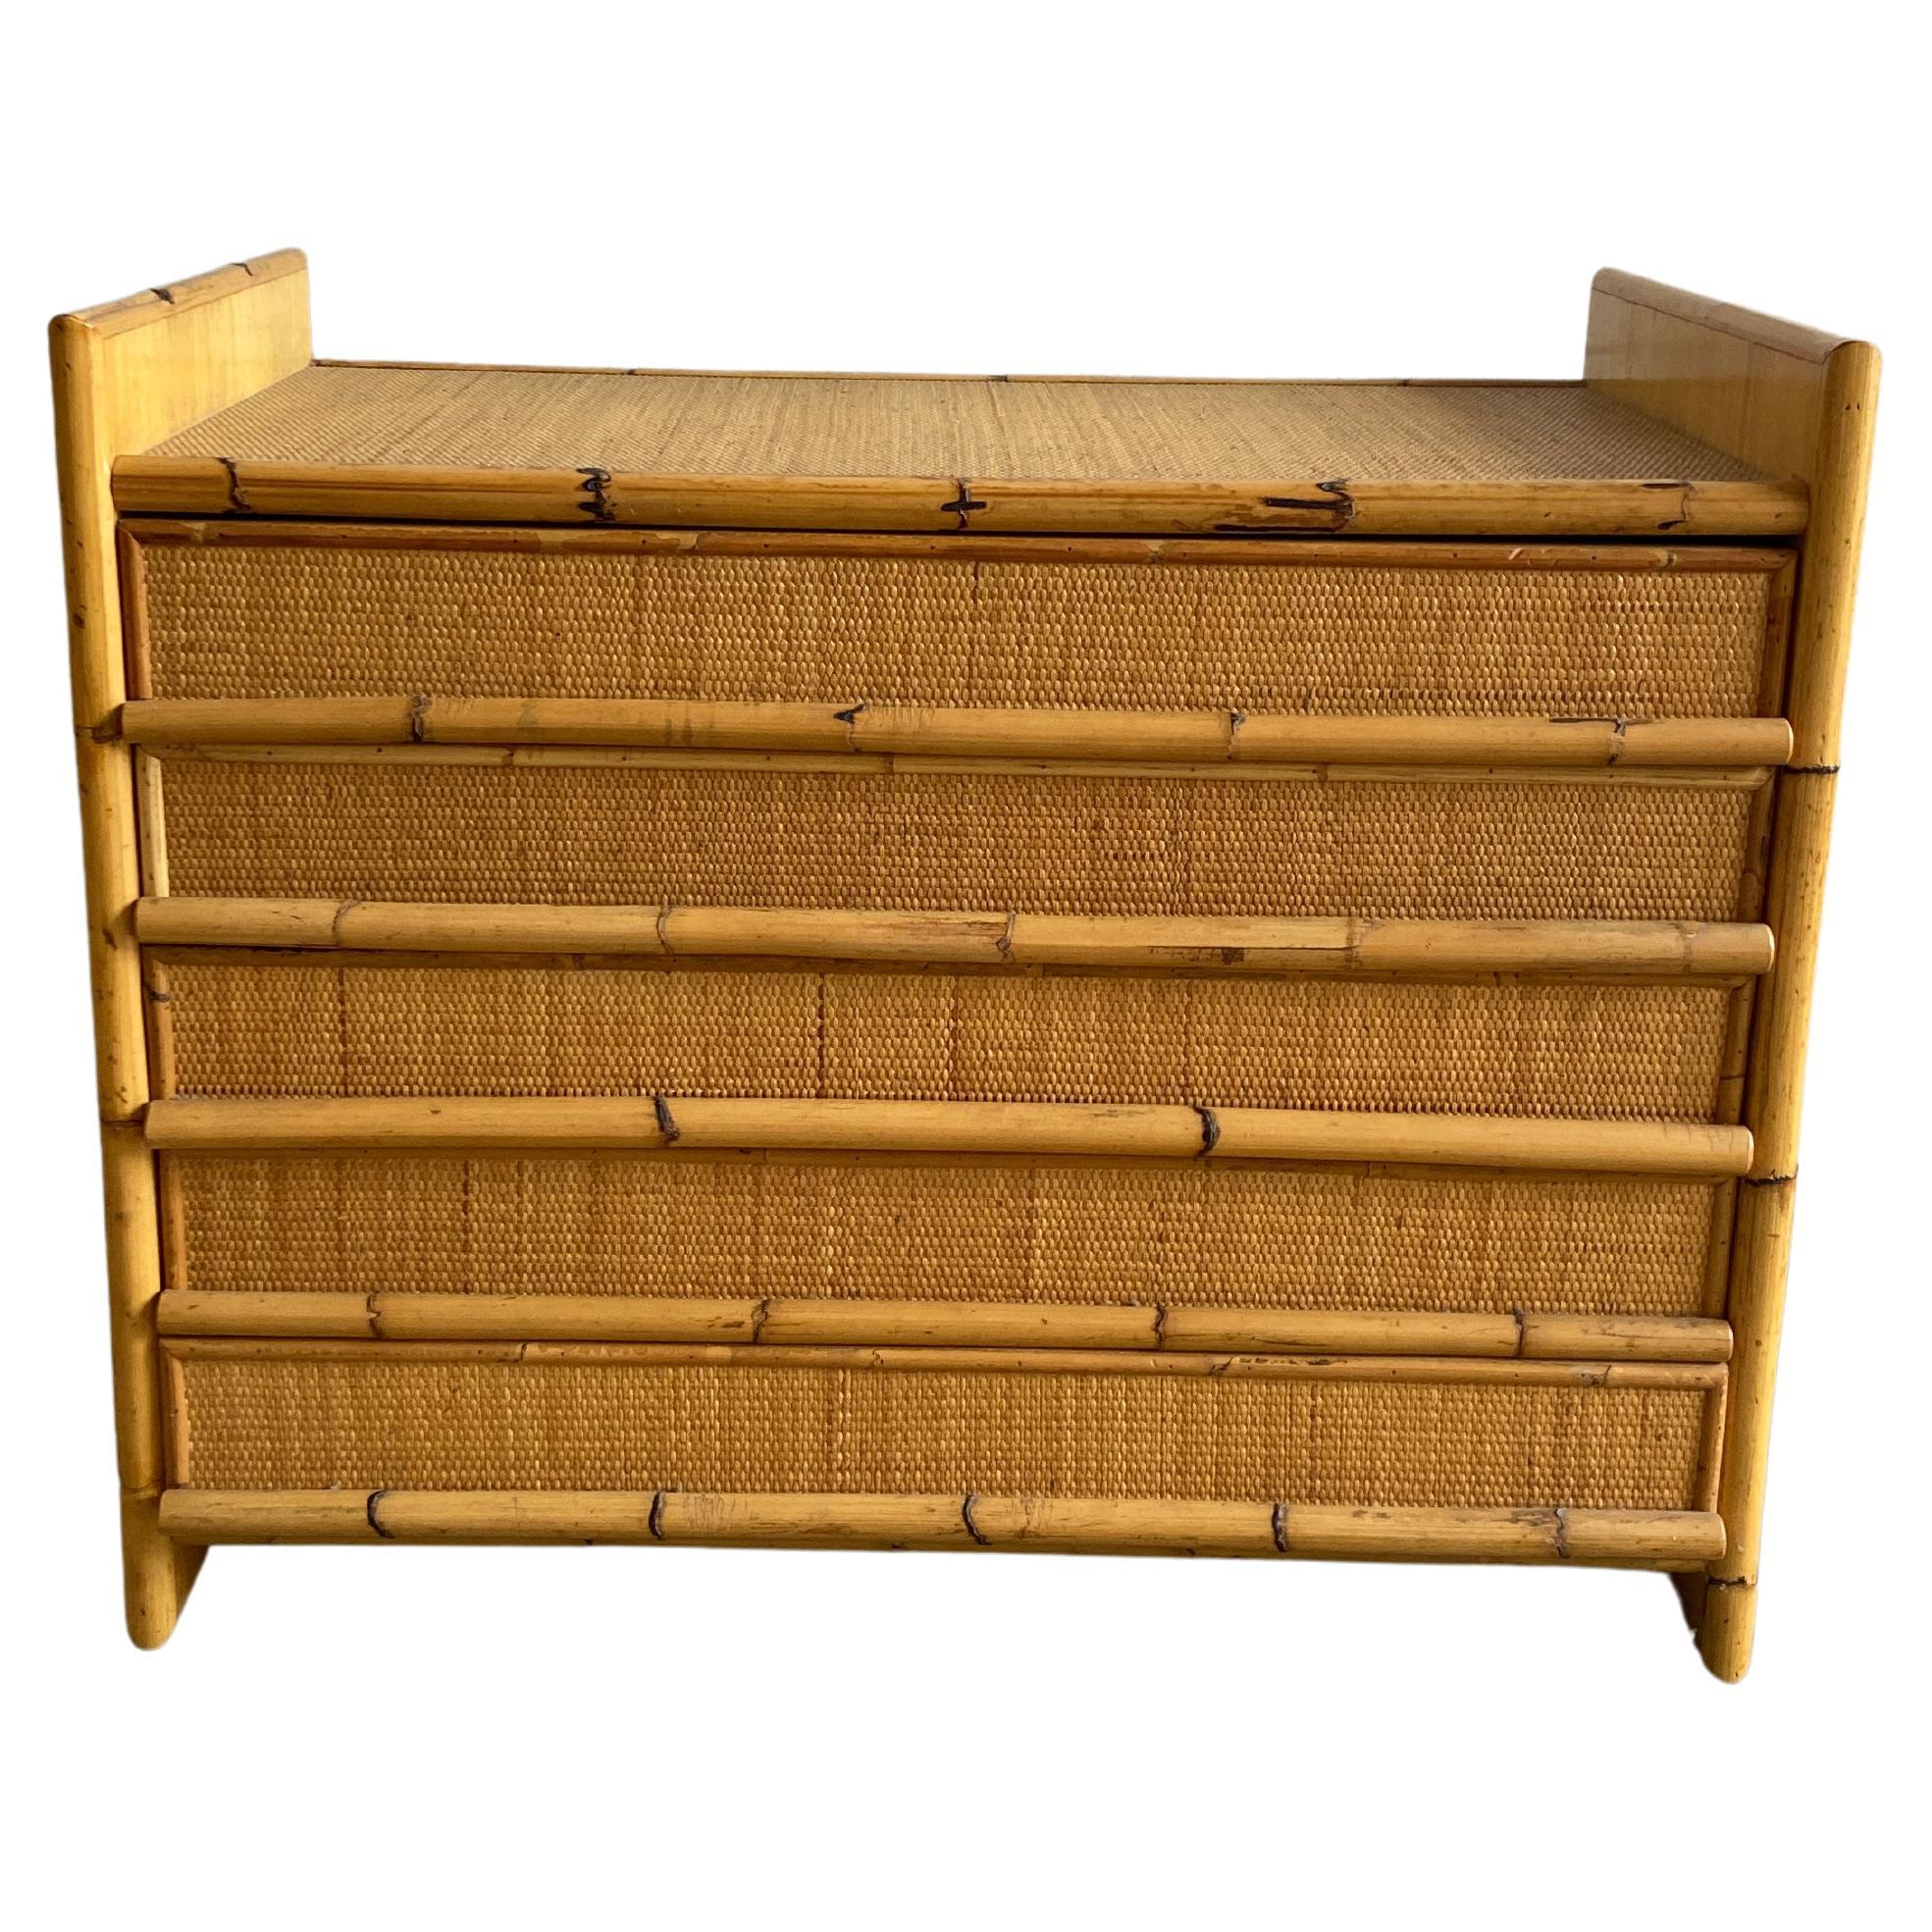 Mid-Century Modern Italian Bamboo and Rattan Dresser with 5 Drawers, 1970s